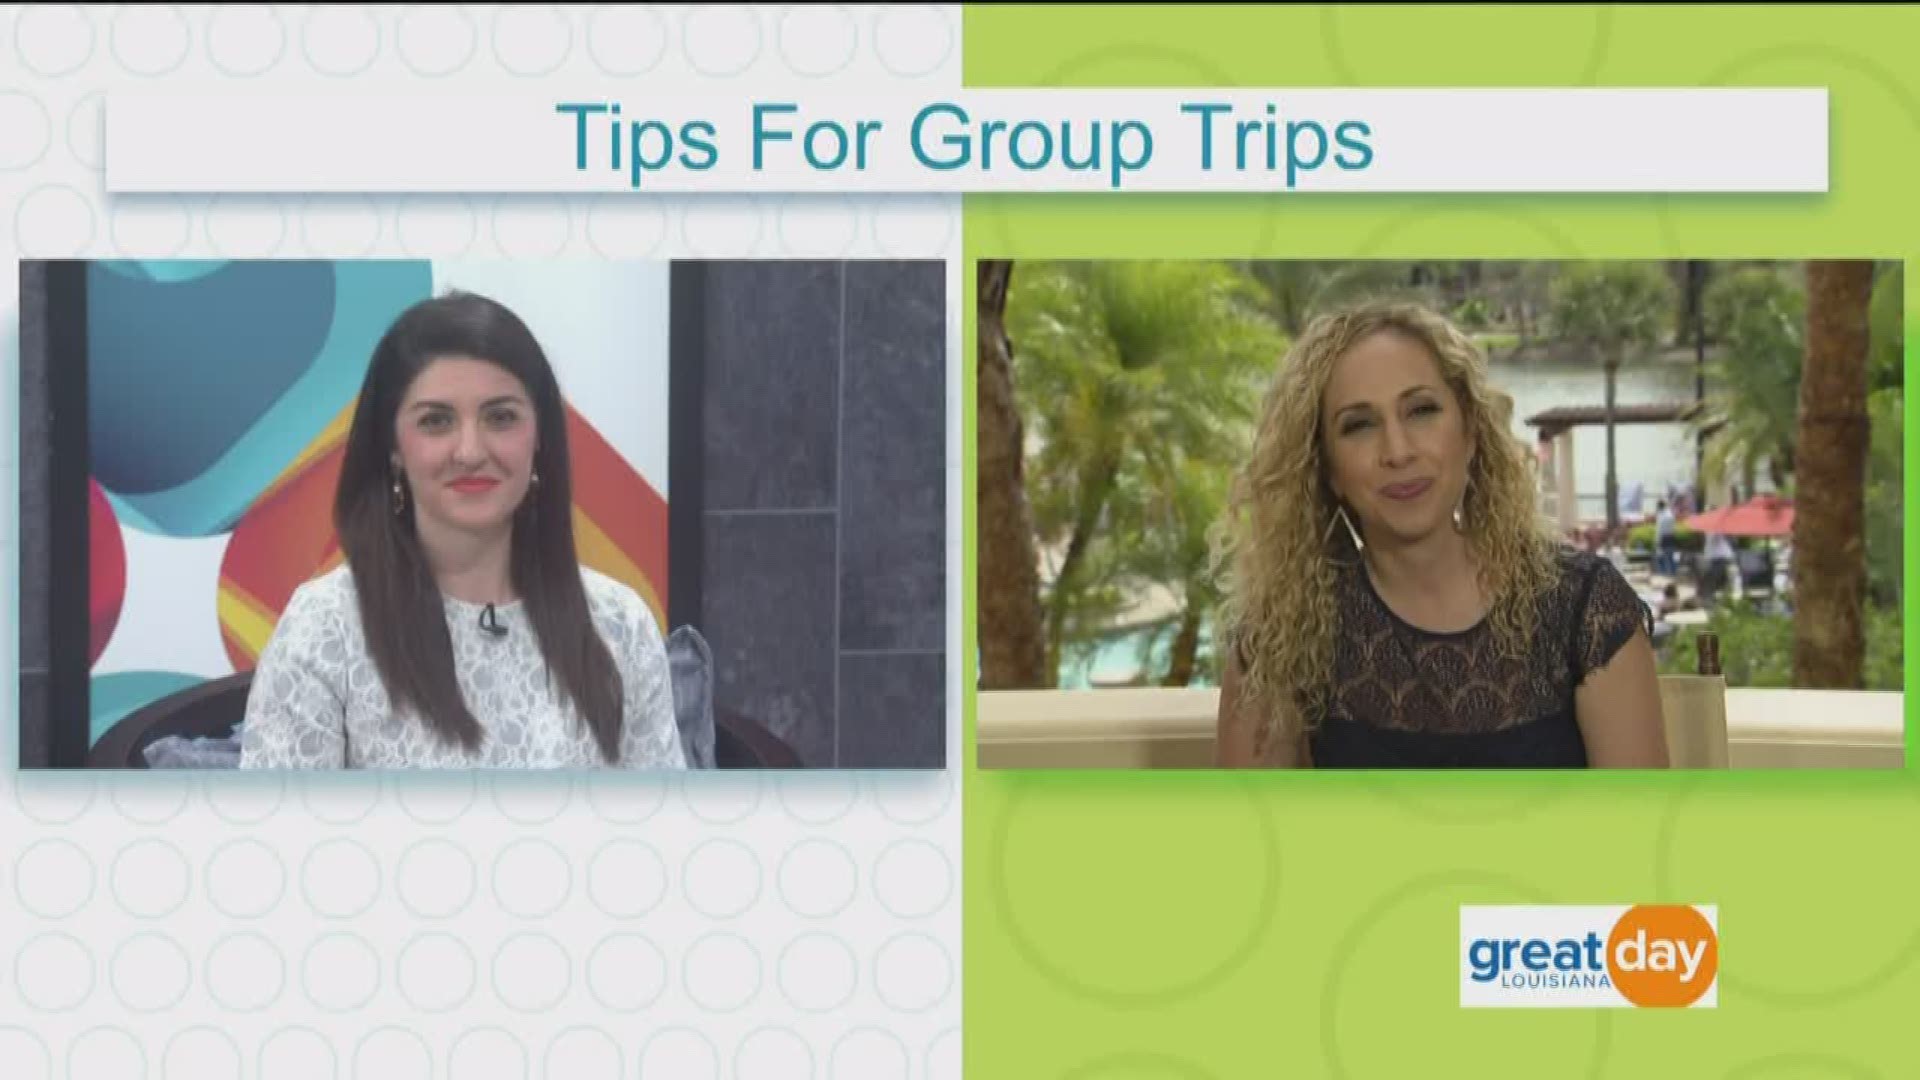 Lifestyle & Travel Expert Jeannette Kaplun joins us to talk about trends for travel in 2019.